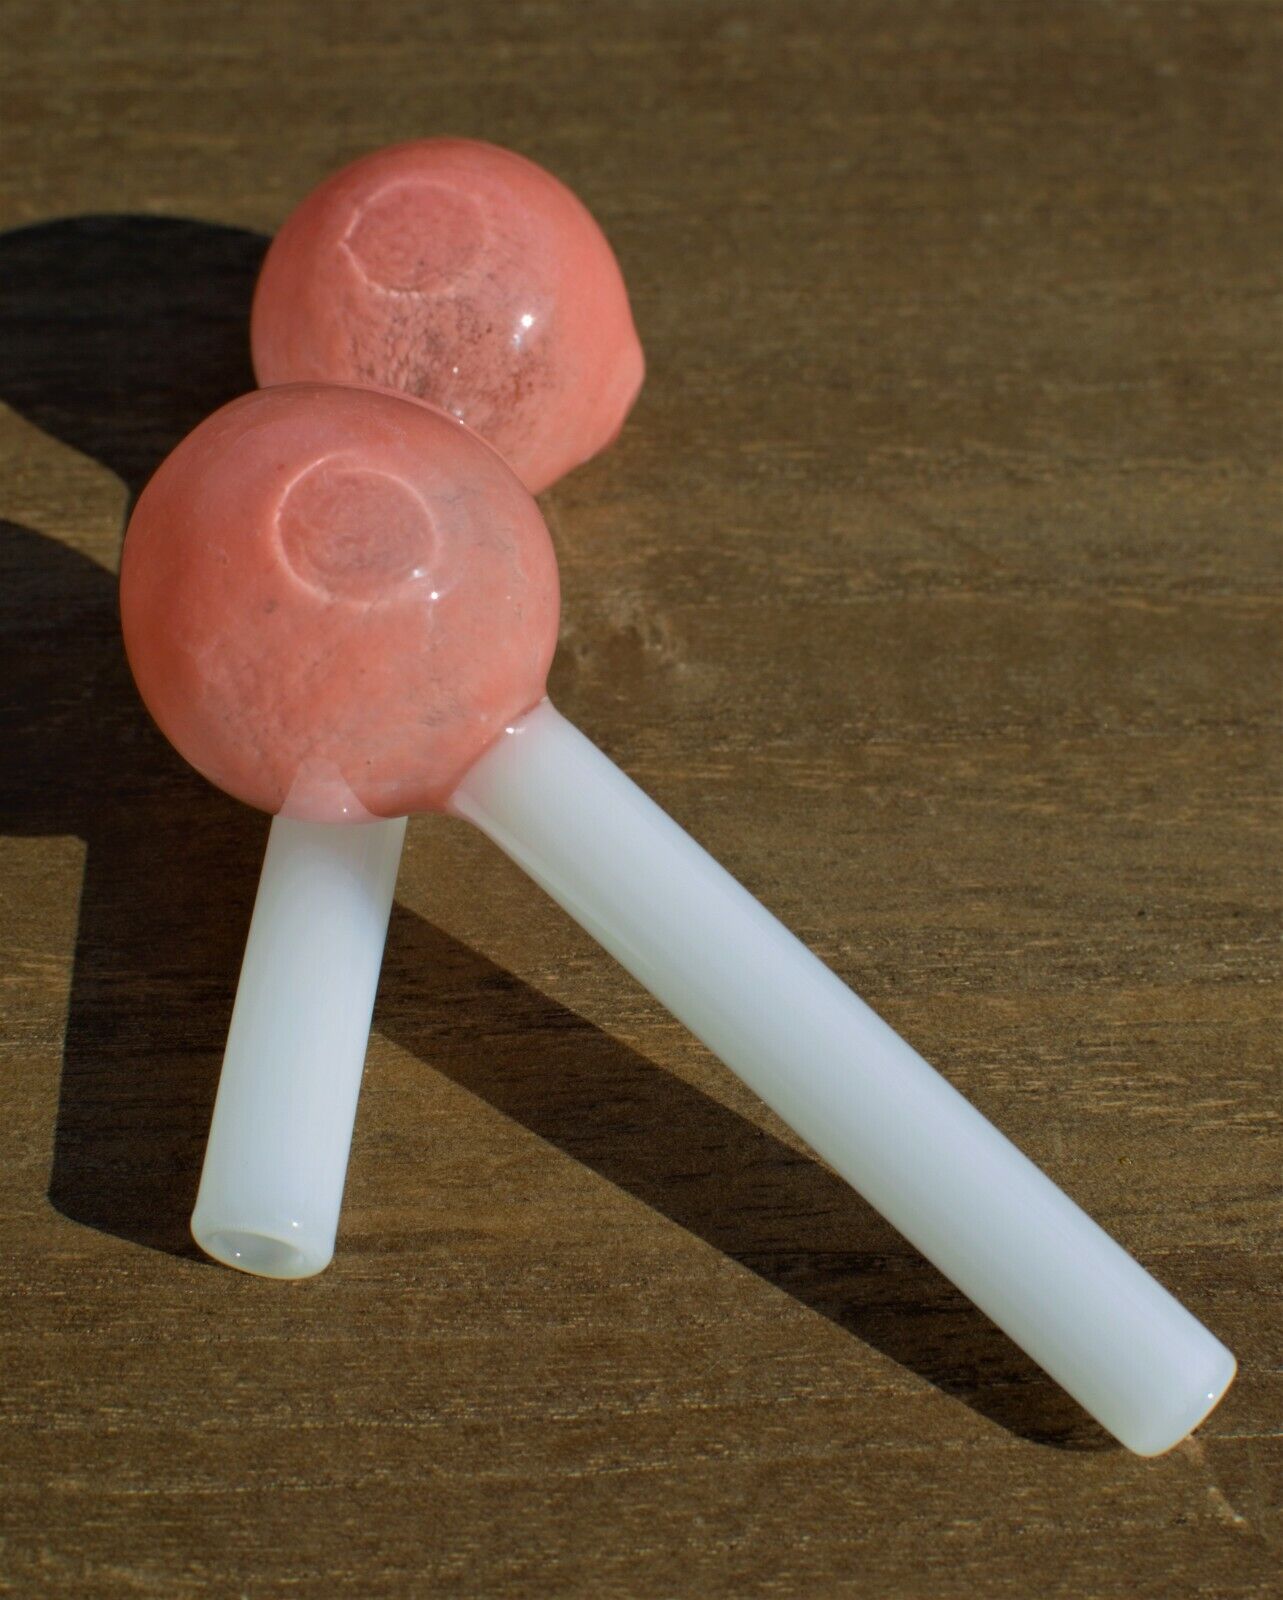 Lollipop lollipop Oh lolli lolli lolli, I'll Take You To The Candyshop - 4 inch 